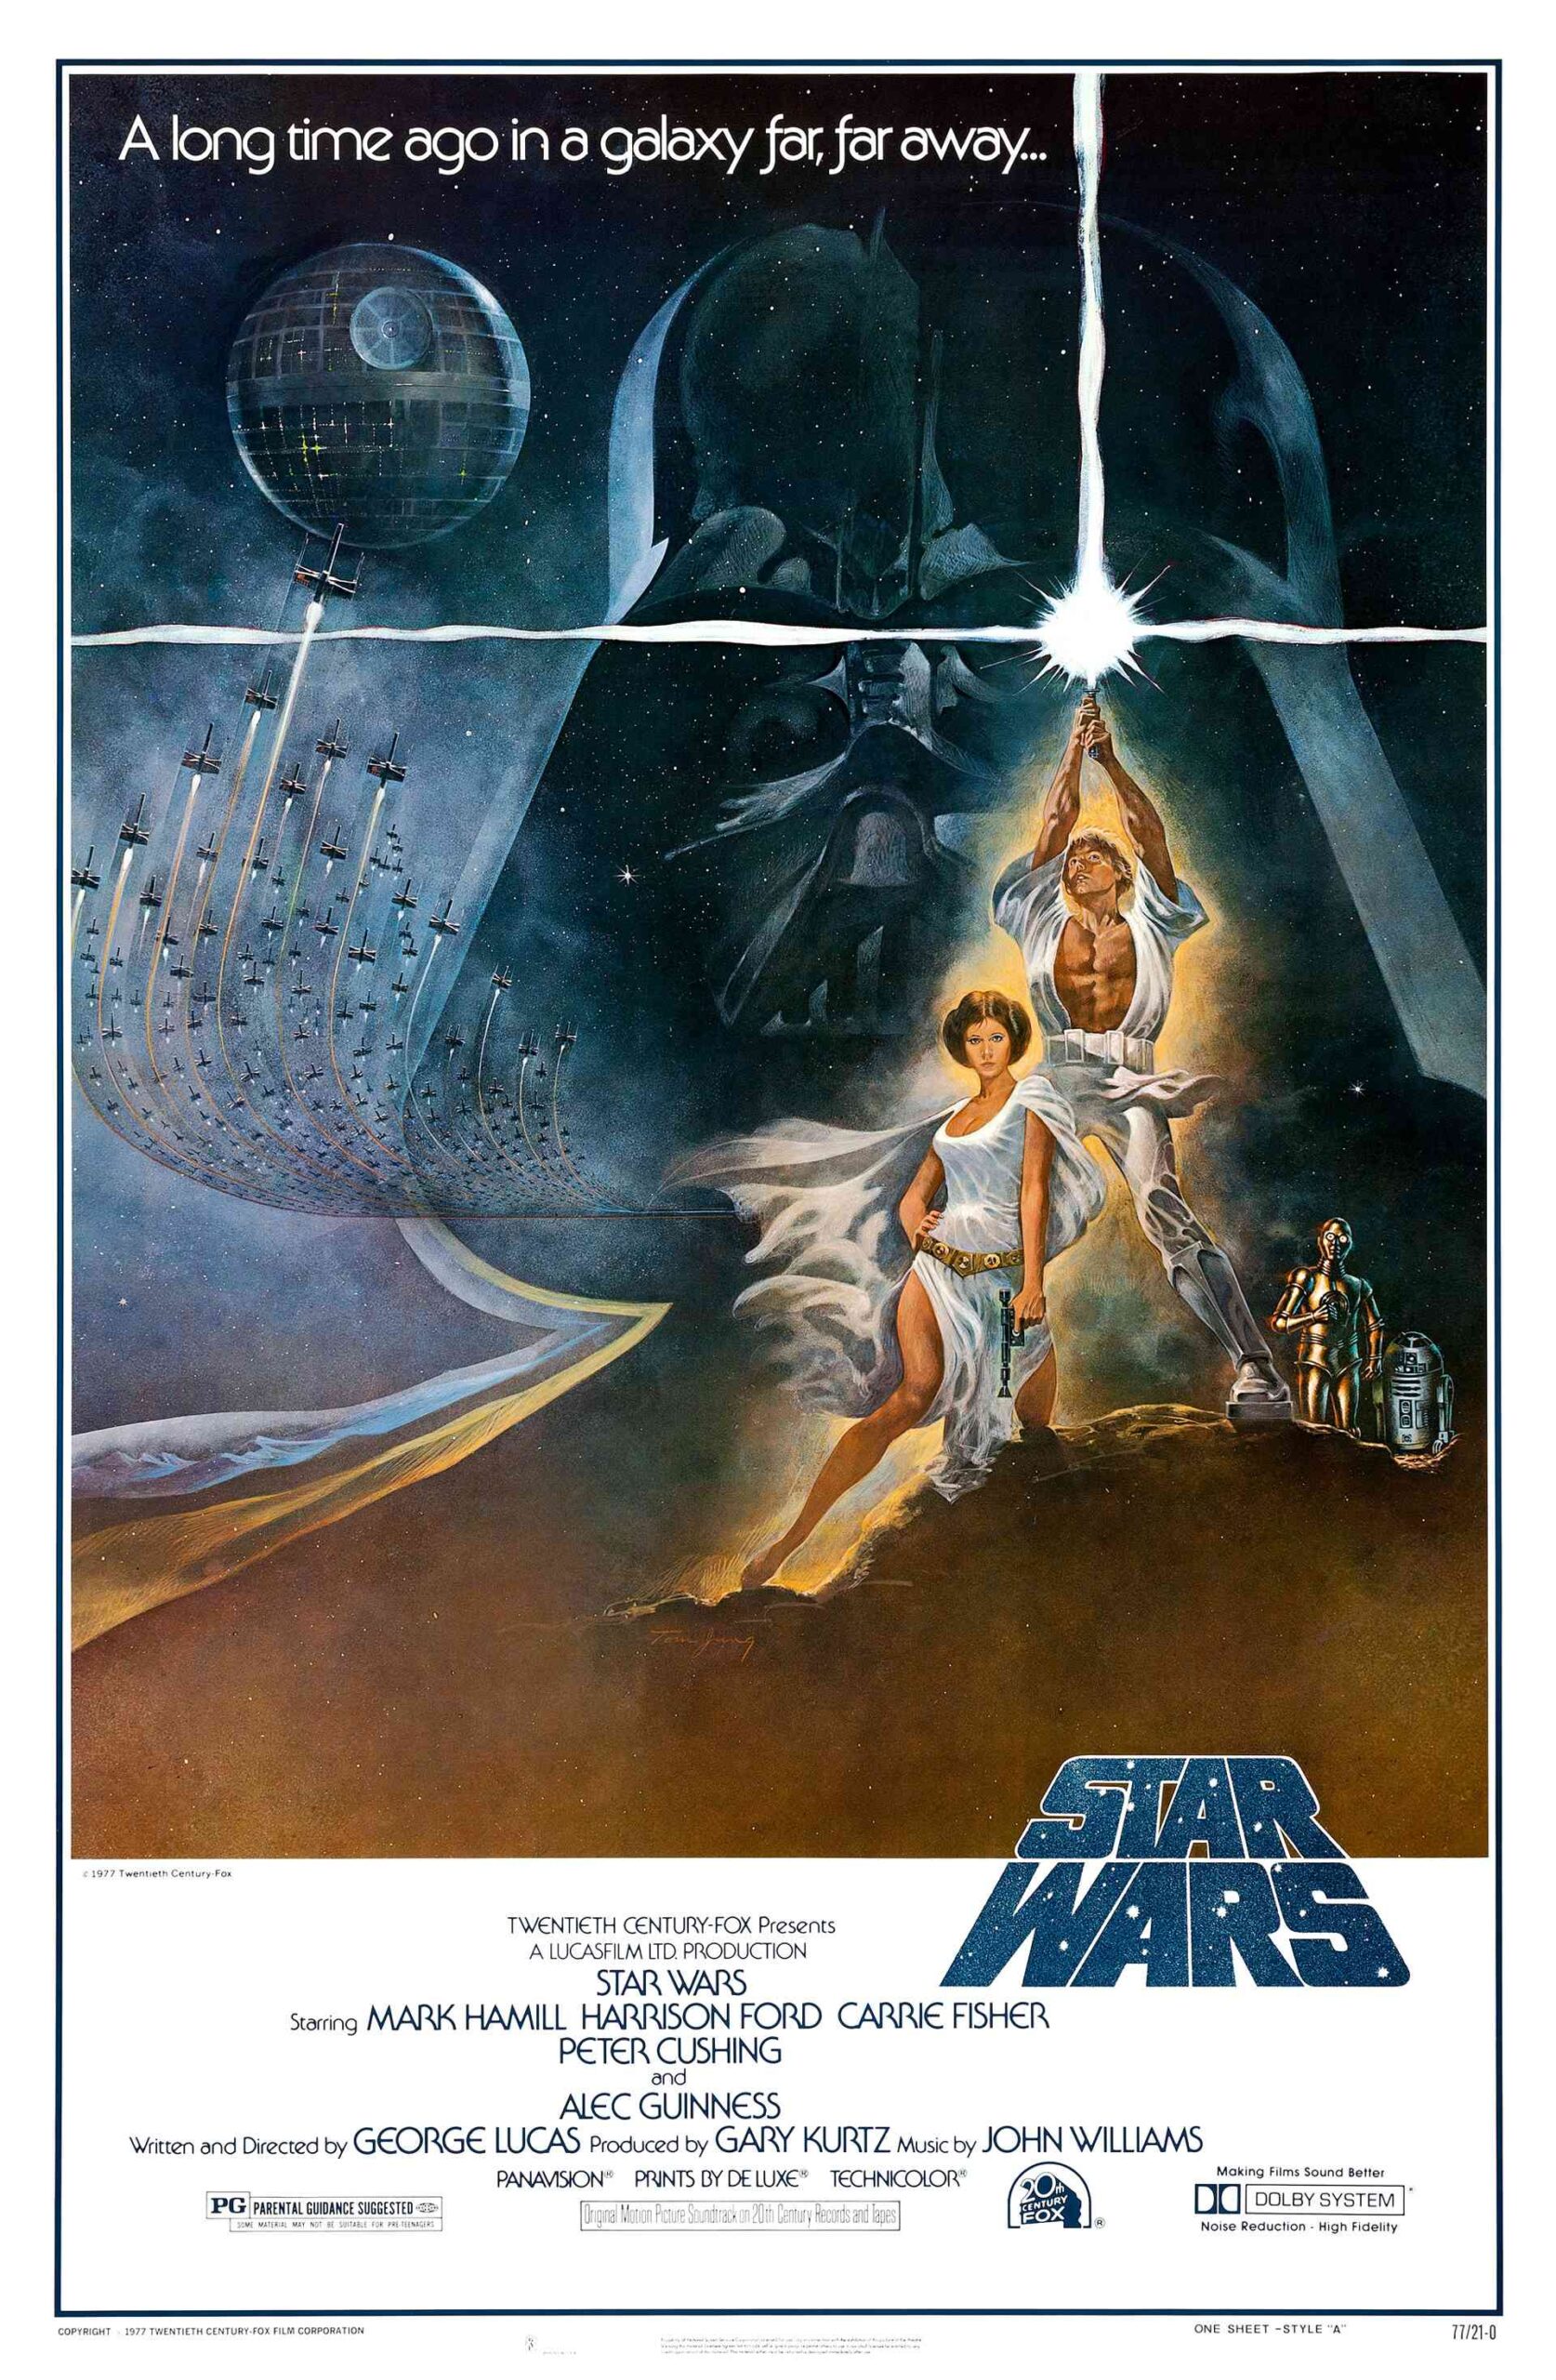 FULL MOVIE: Star Wars: Episode IV – A New Hope (1977)